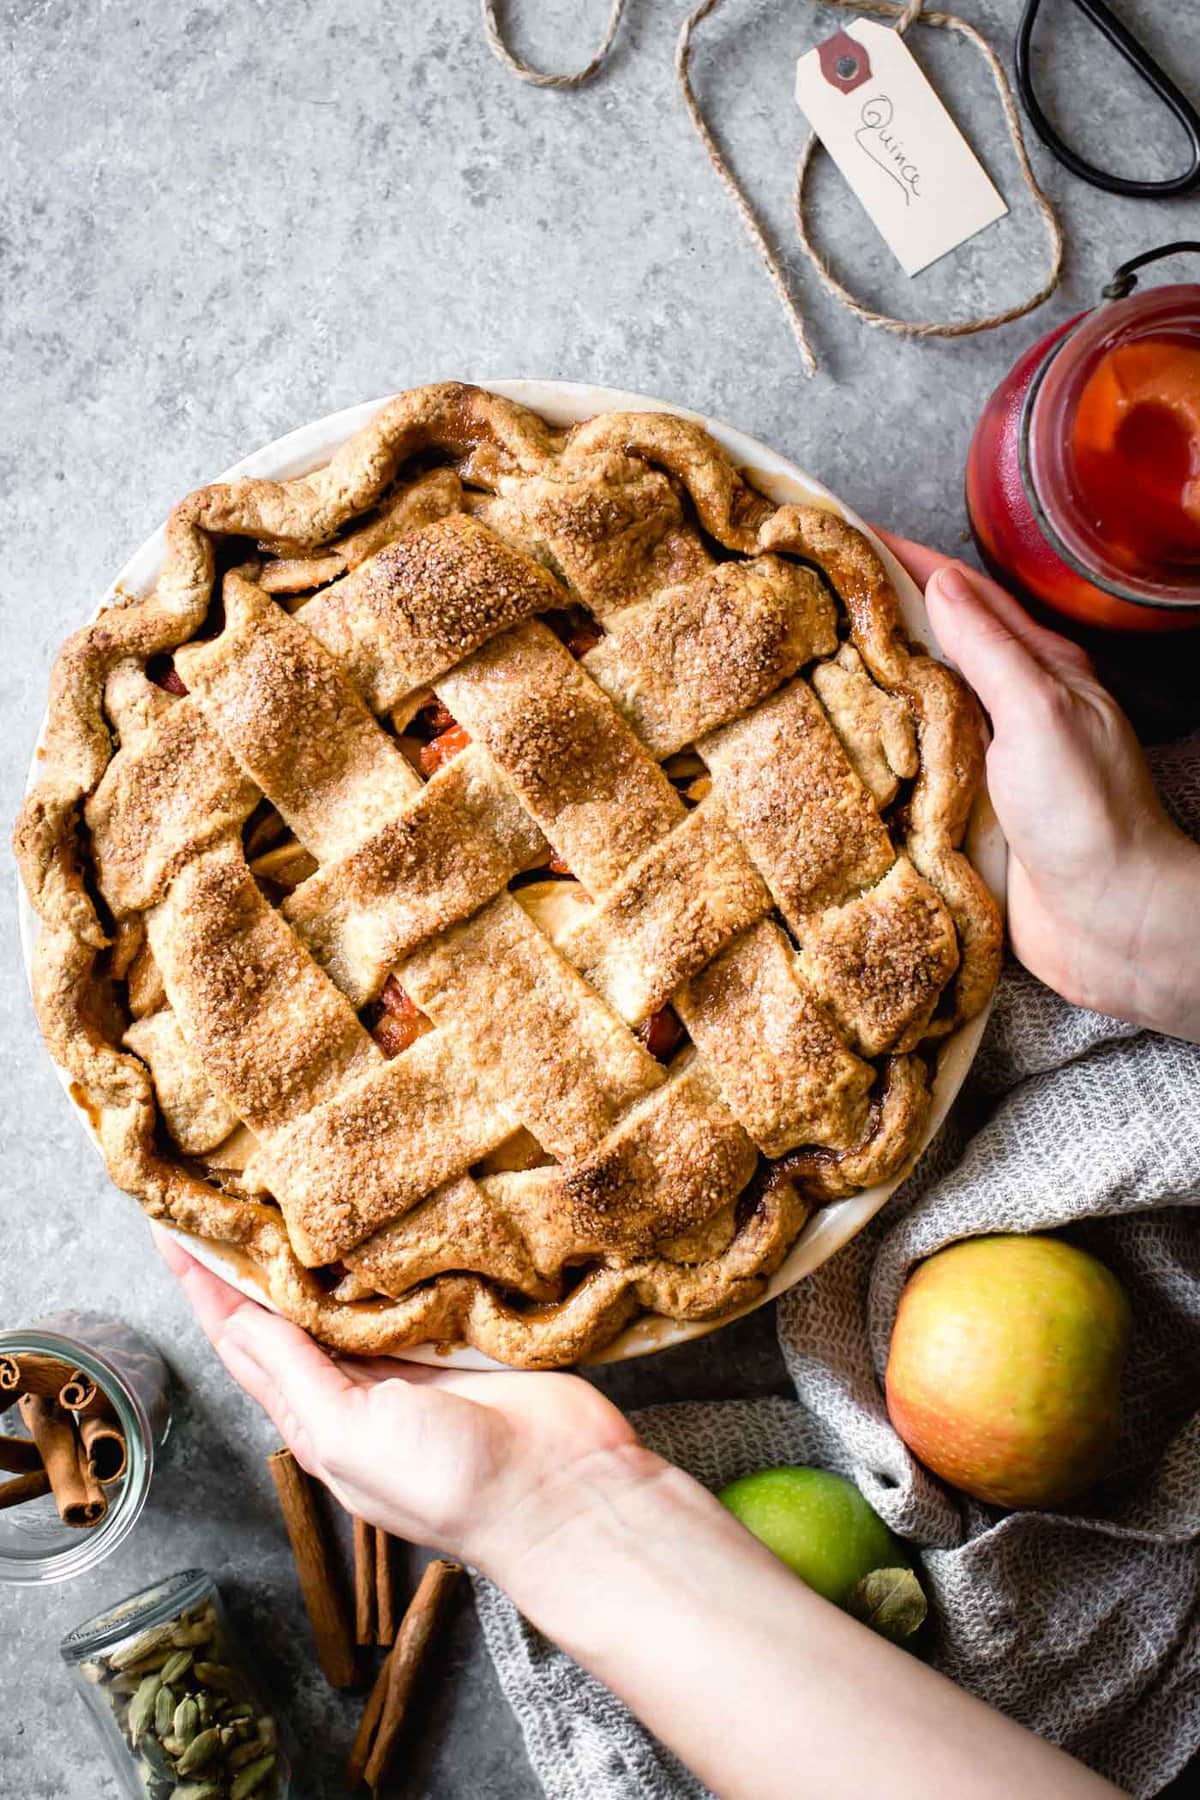 Hands are placing a handsome lattice-topped pie on a gray surface